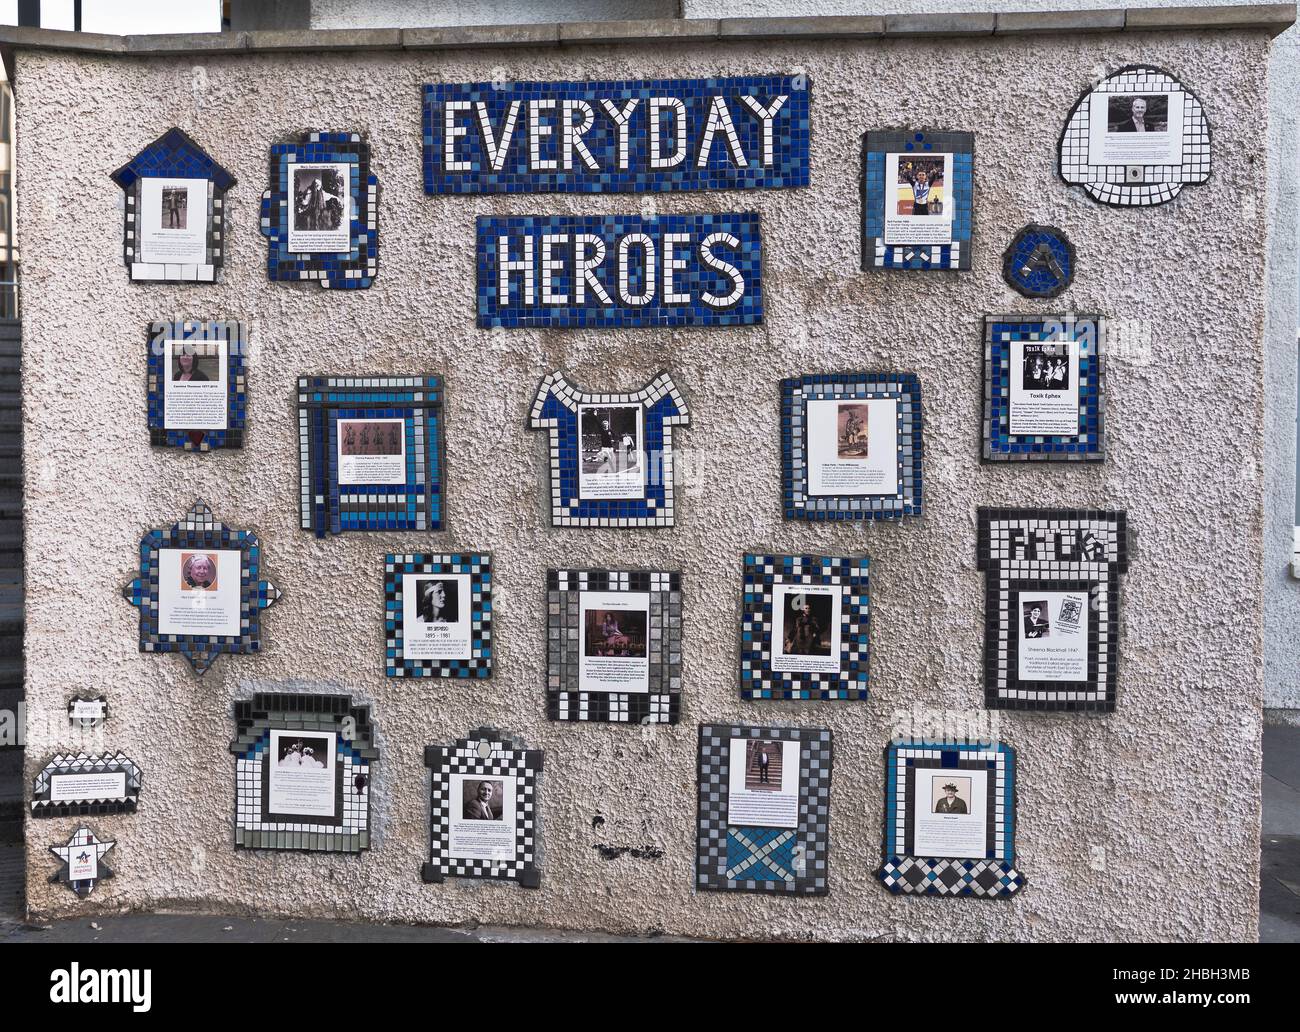 dh Everyday heroes wall ABERDEEN SCOTLAND Famous Aberdonian hero people memorial walls Stock Photo